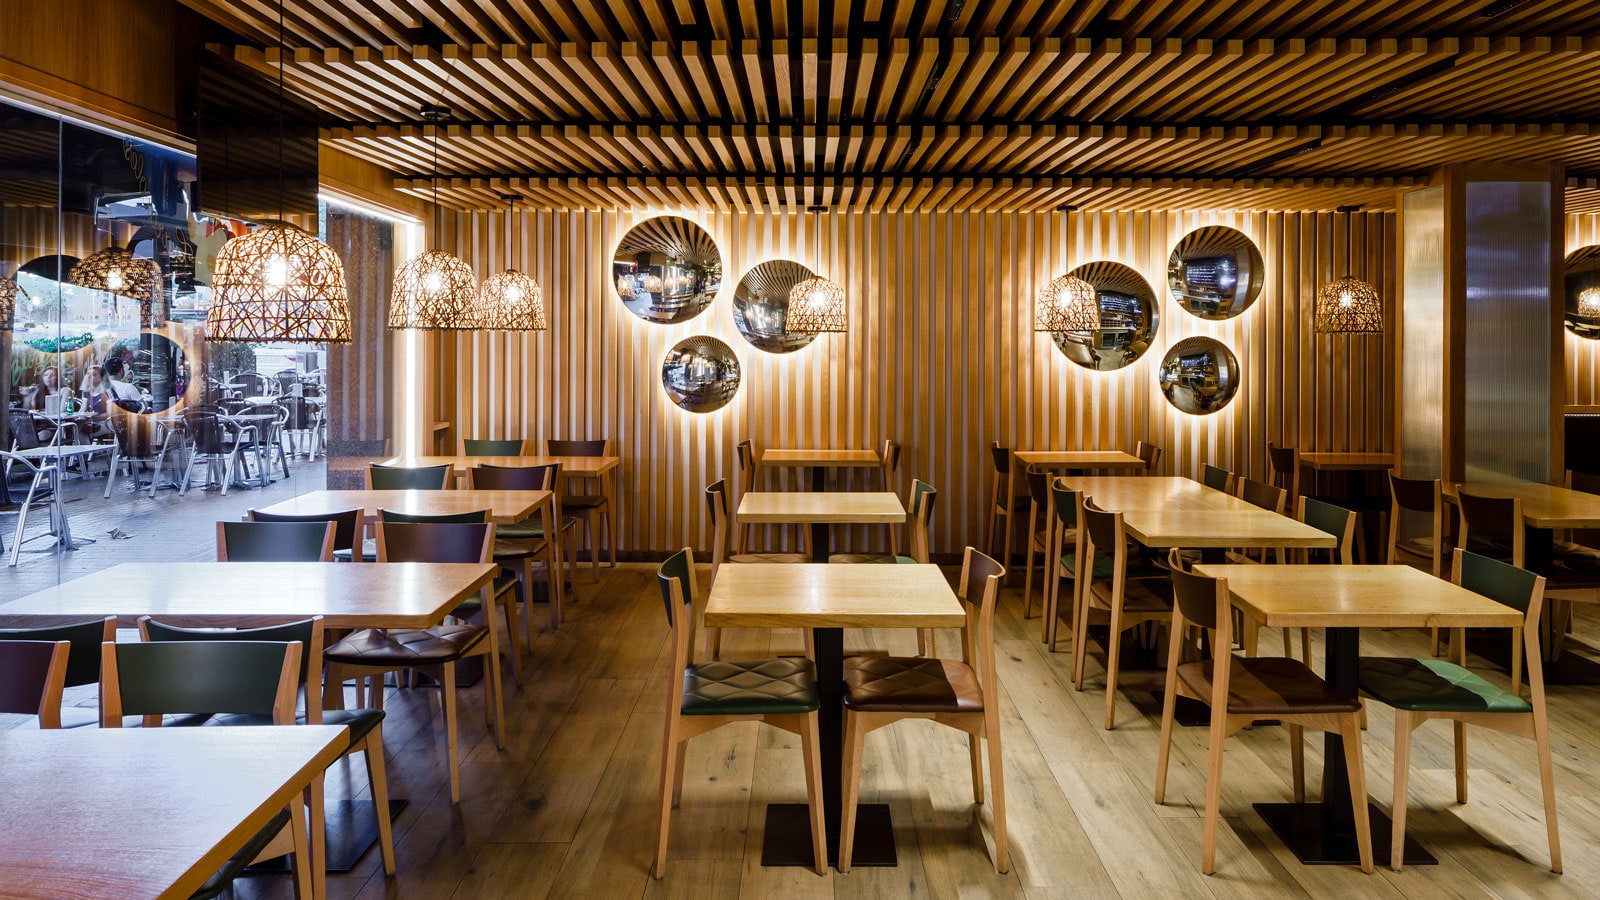 Restaurant El Cargolet Picant adds a dash of Porcelanosa to its dishes